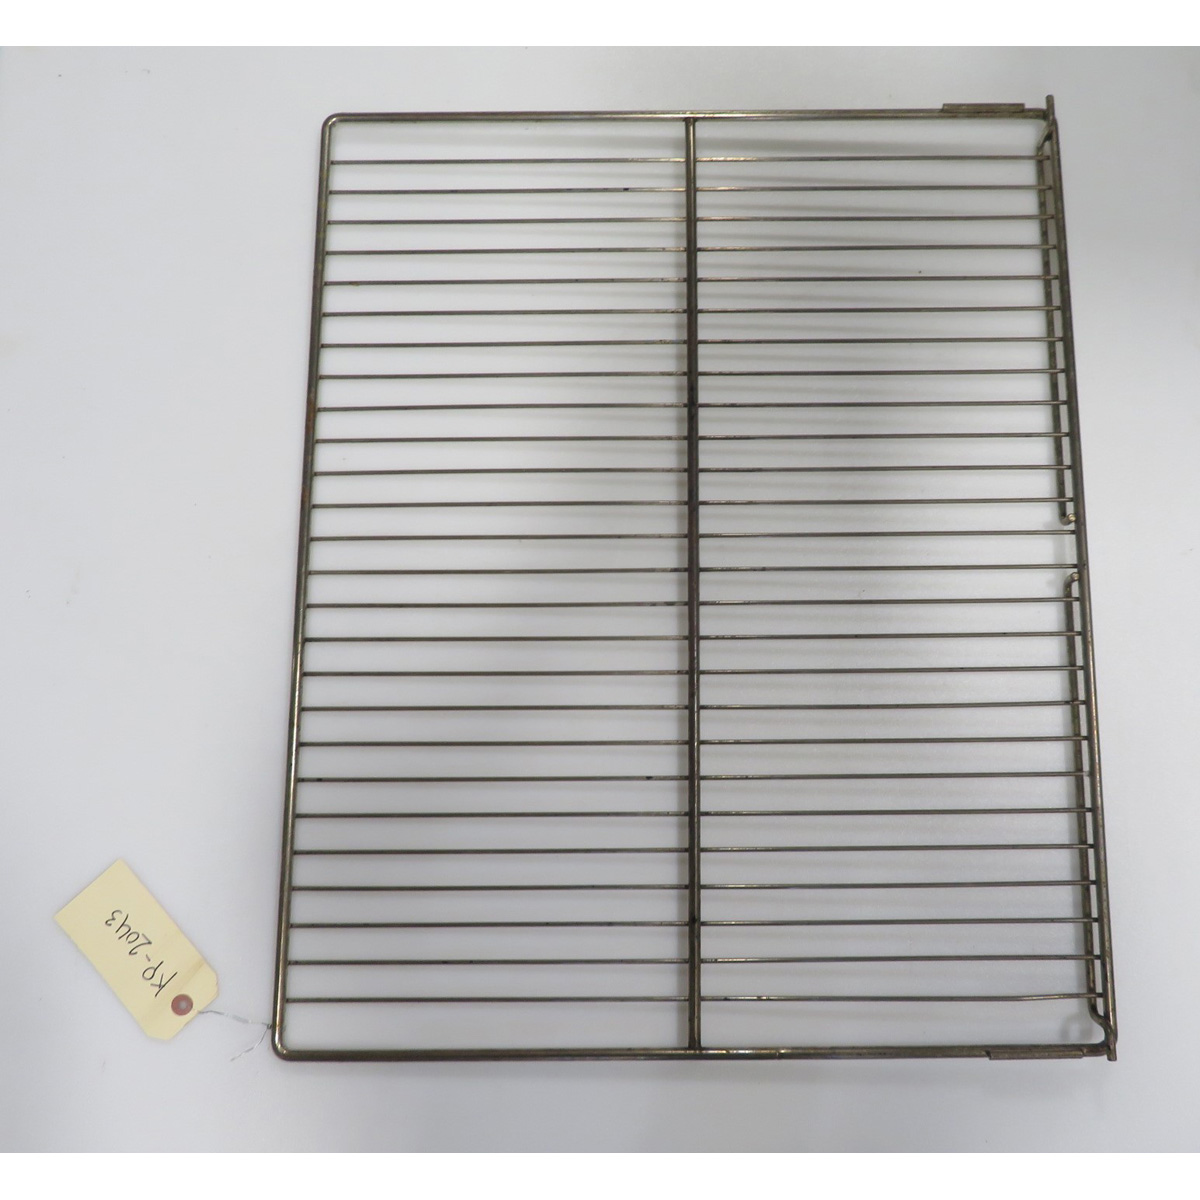 Duke 153230 Oven Rack, Standard, Used Excellent Condition image 1